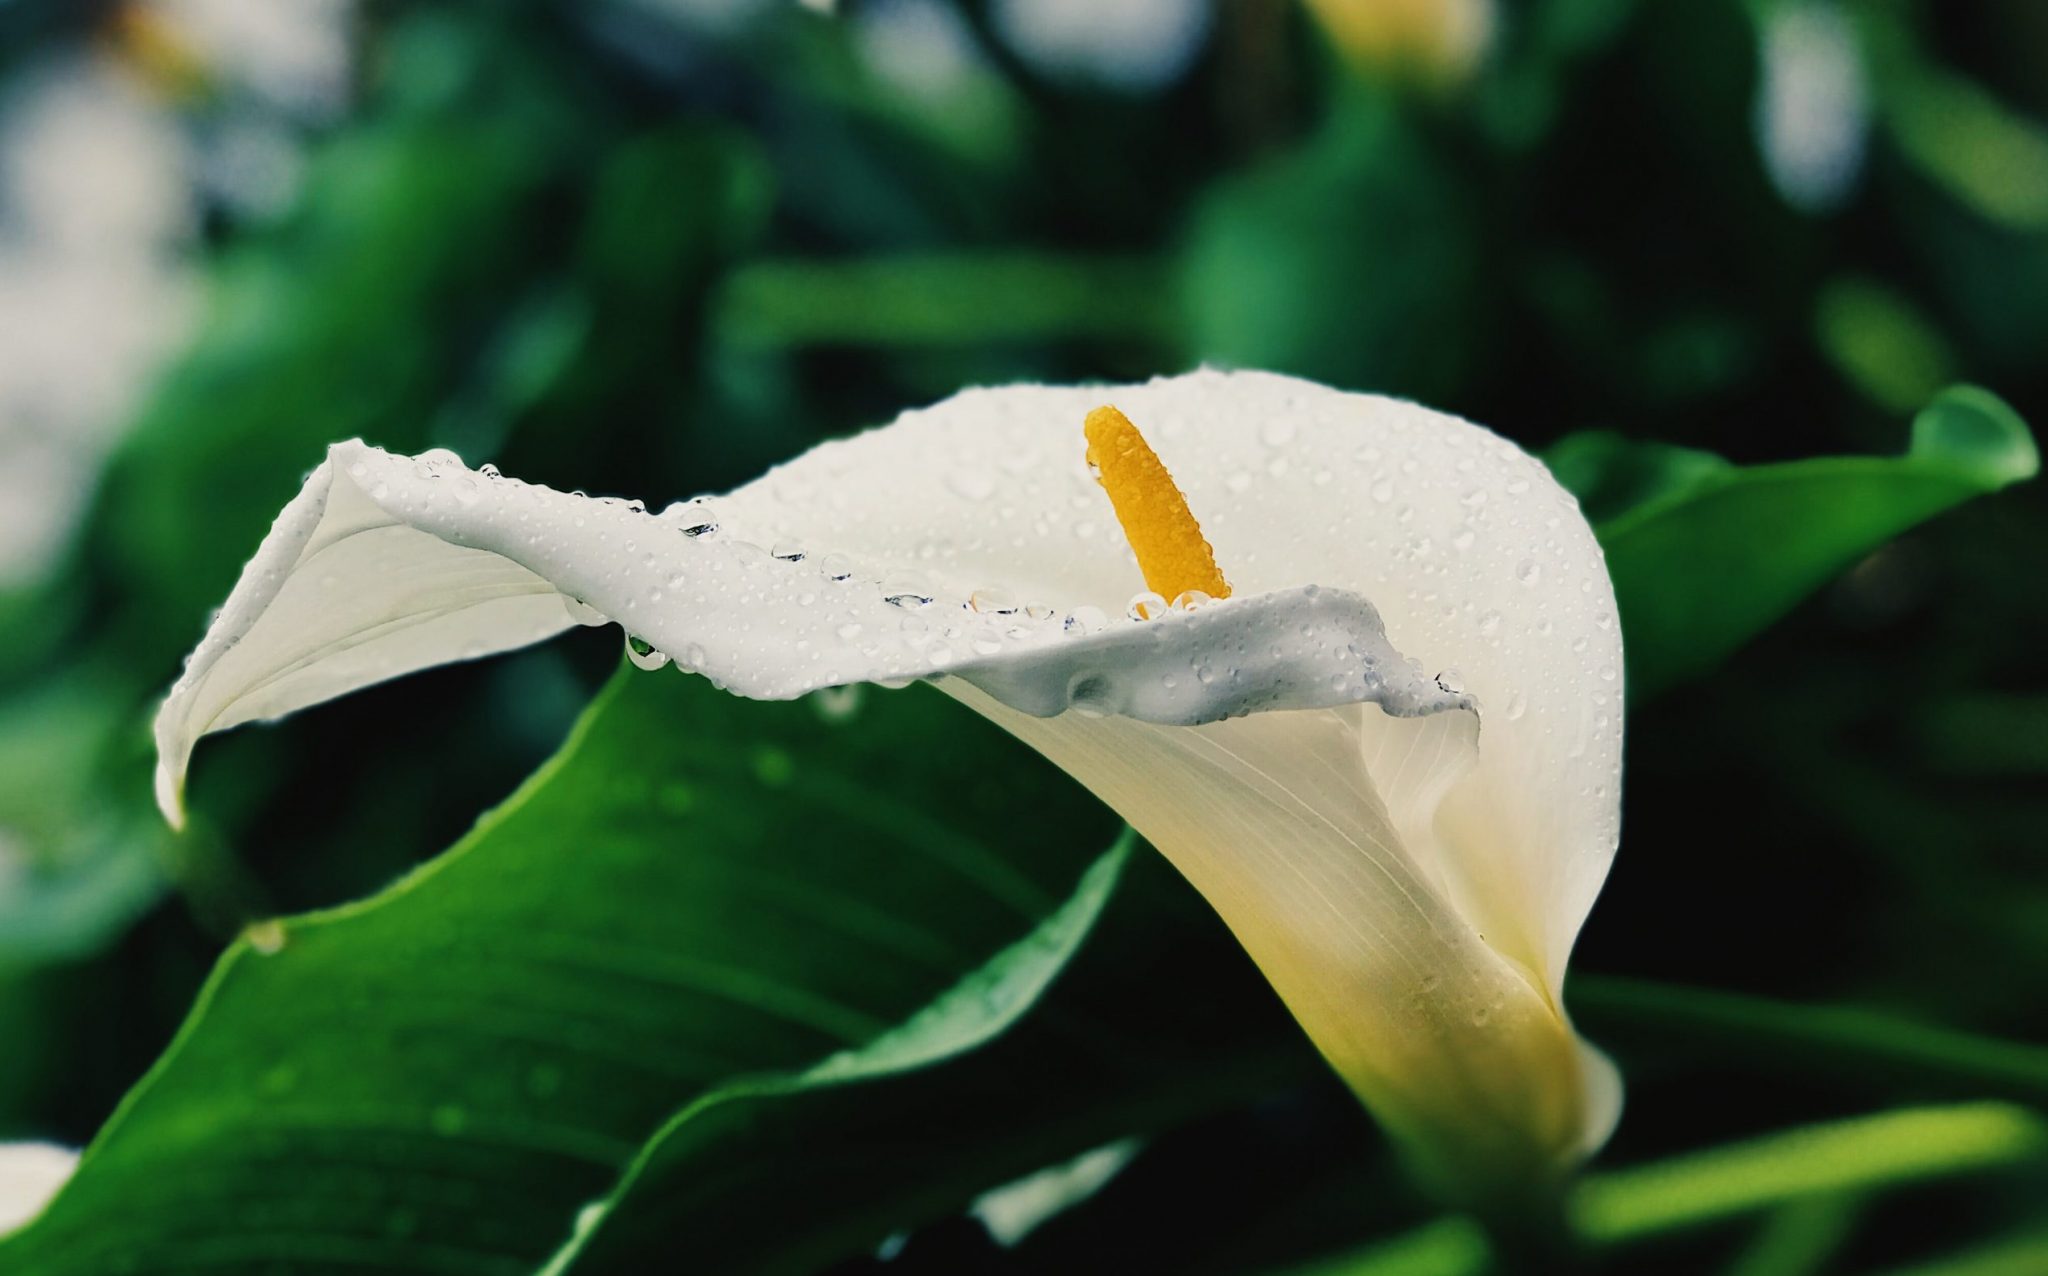 Growing Calla Lilies: How to Plant & Care for Calla Lily from Bulbs